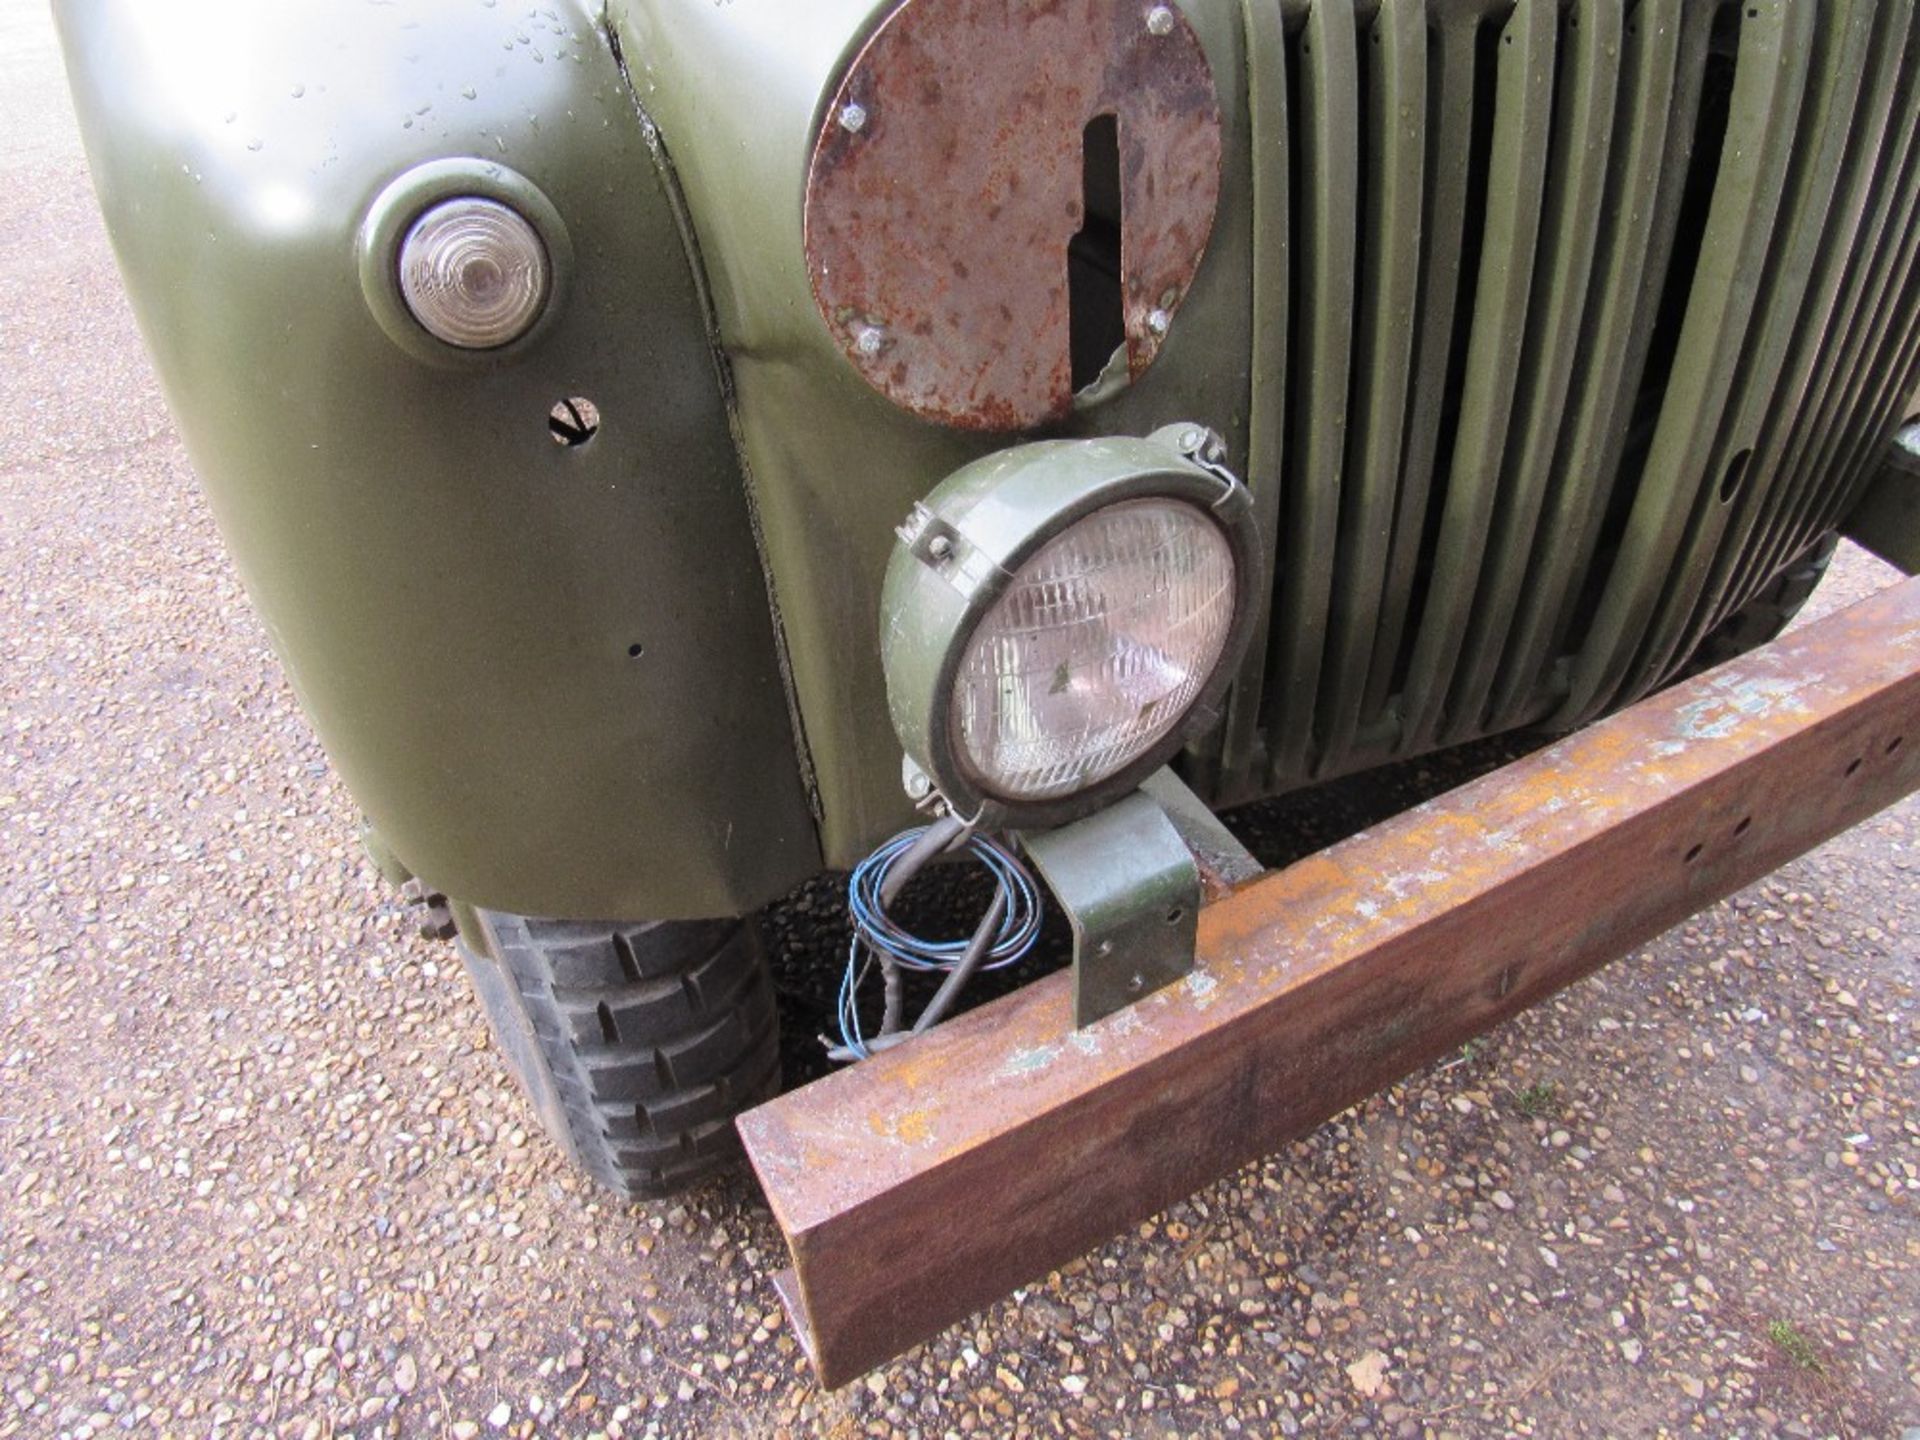 1940's Ford Tanker, ex US Army, 4 wheel drive, flat head V8 petrol engine, runs and drives, - Image 4 of 9